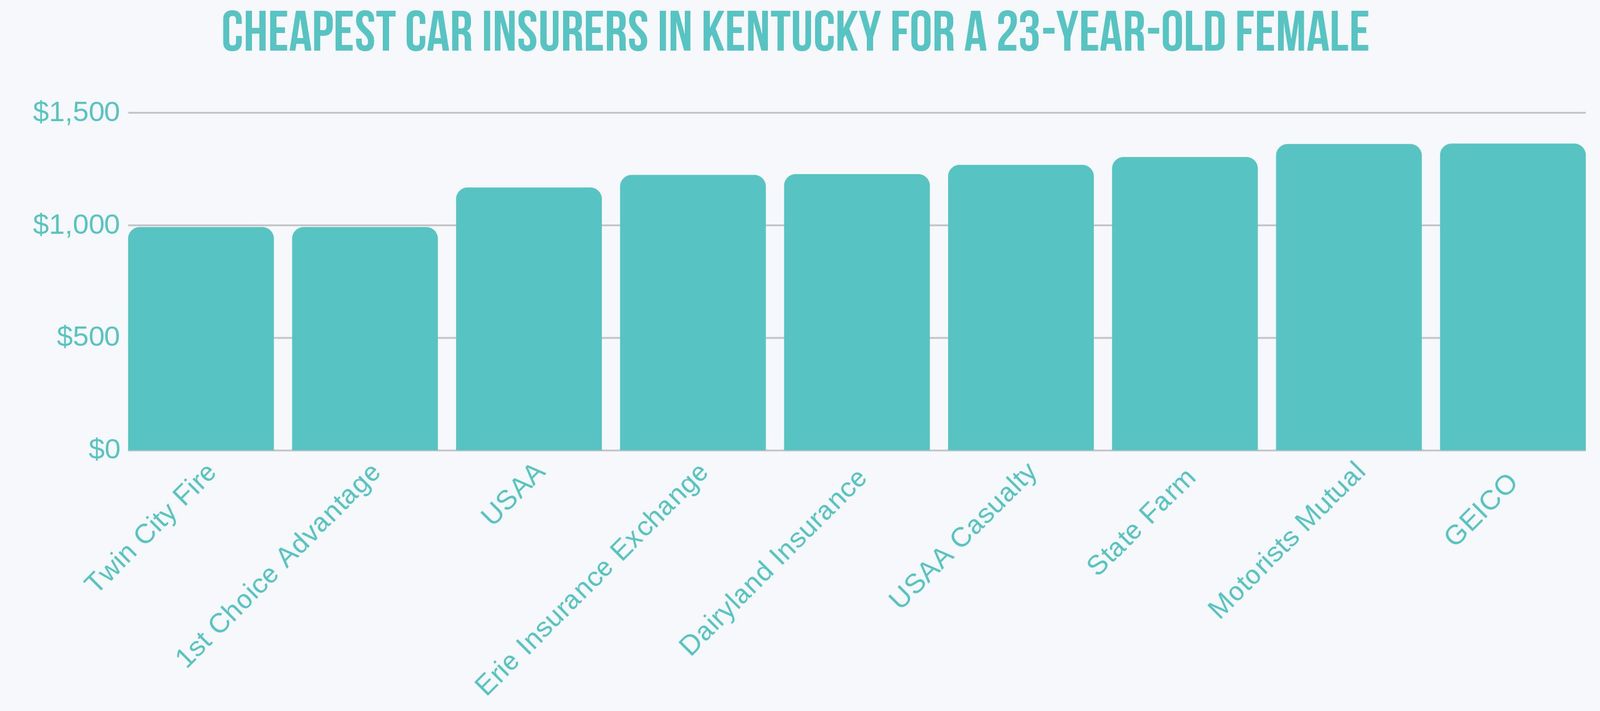 Cheapest Car Insurers for 23-year-old female in Kentucky